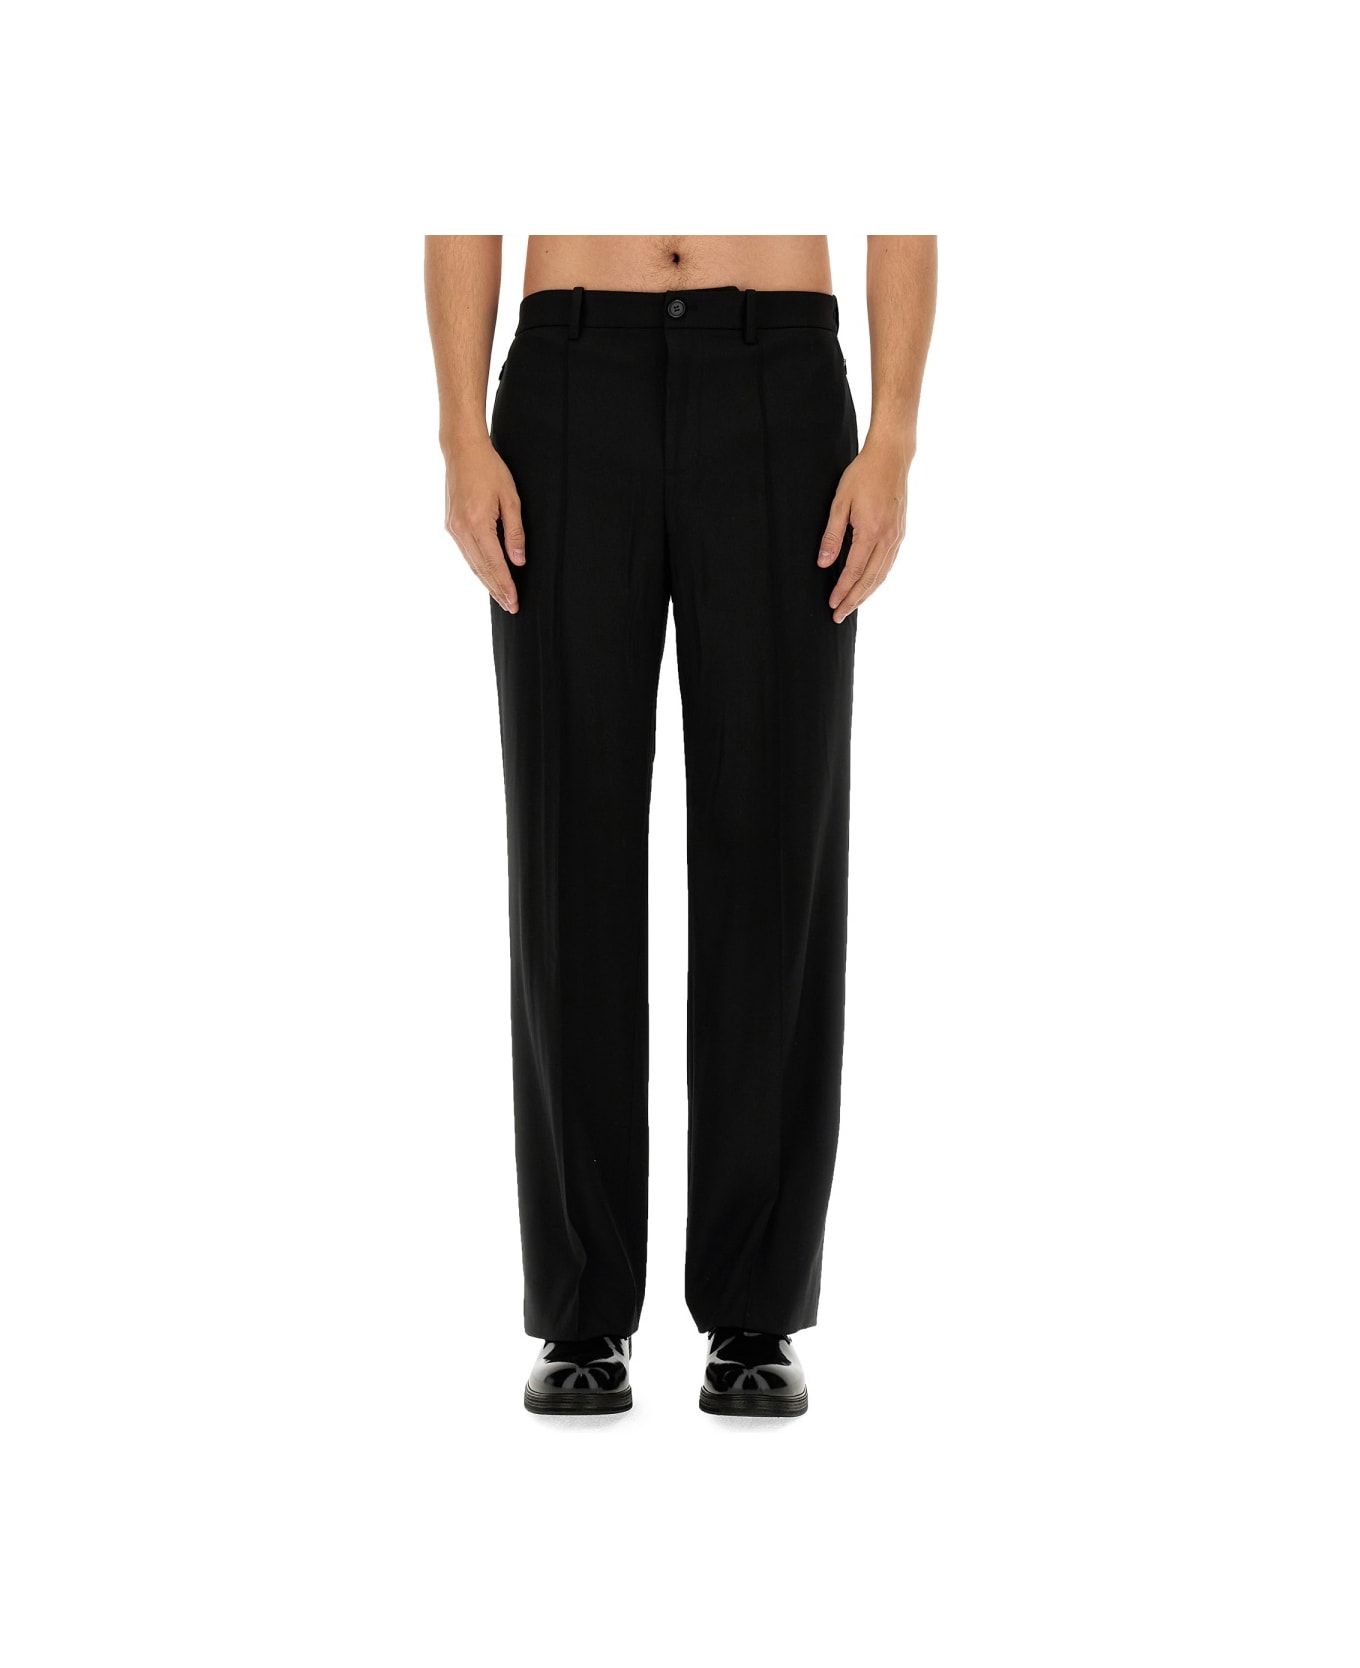 Helmut Lang Relaxed Fit Pants - BLACK ボトムス